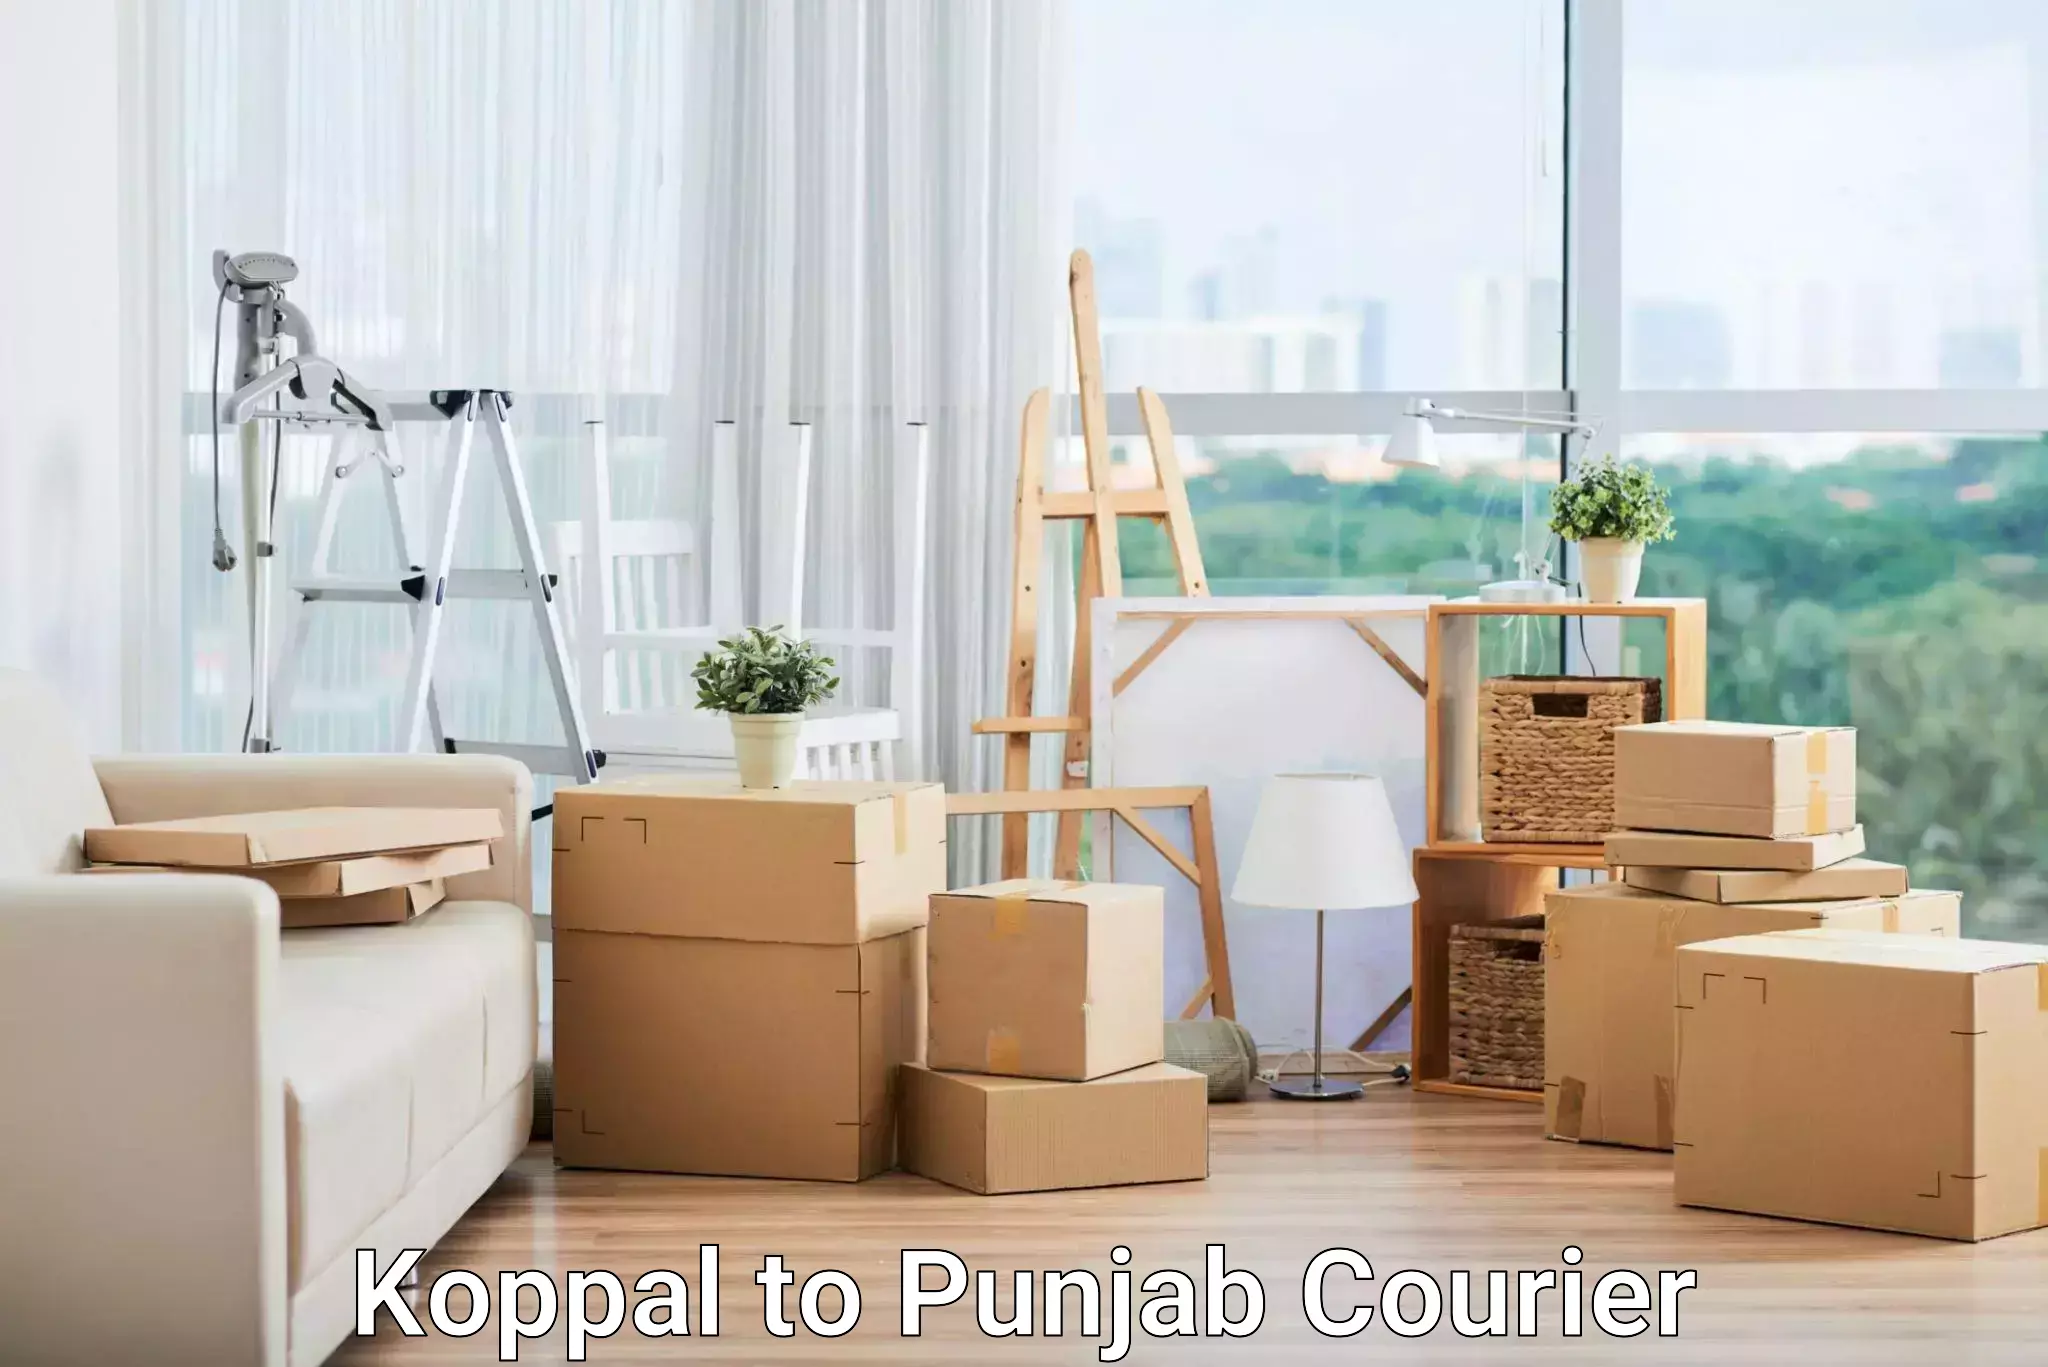 Round-the-clock parcel delivery Koppal to Begowal